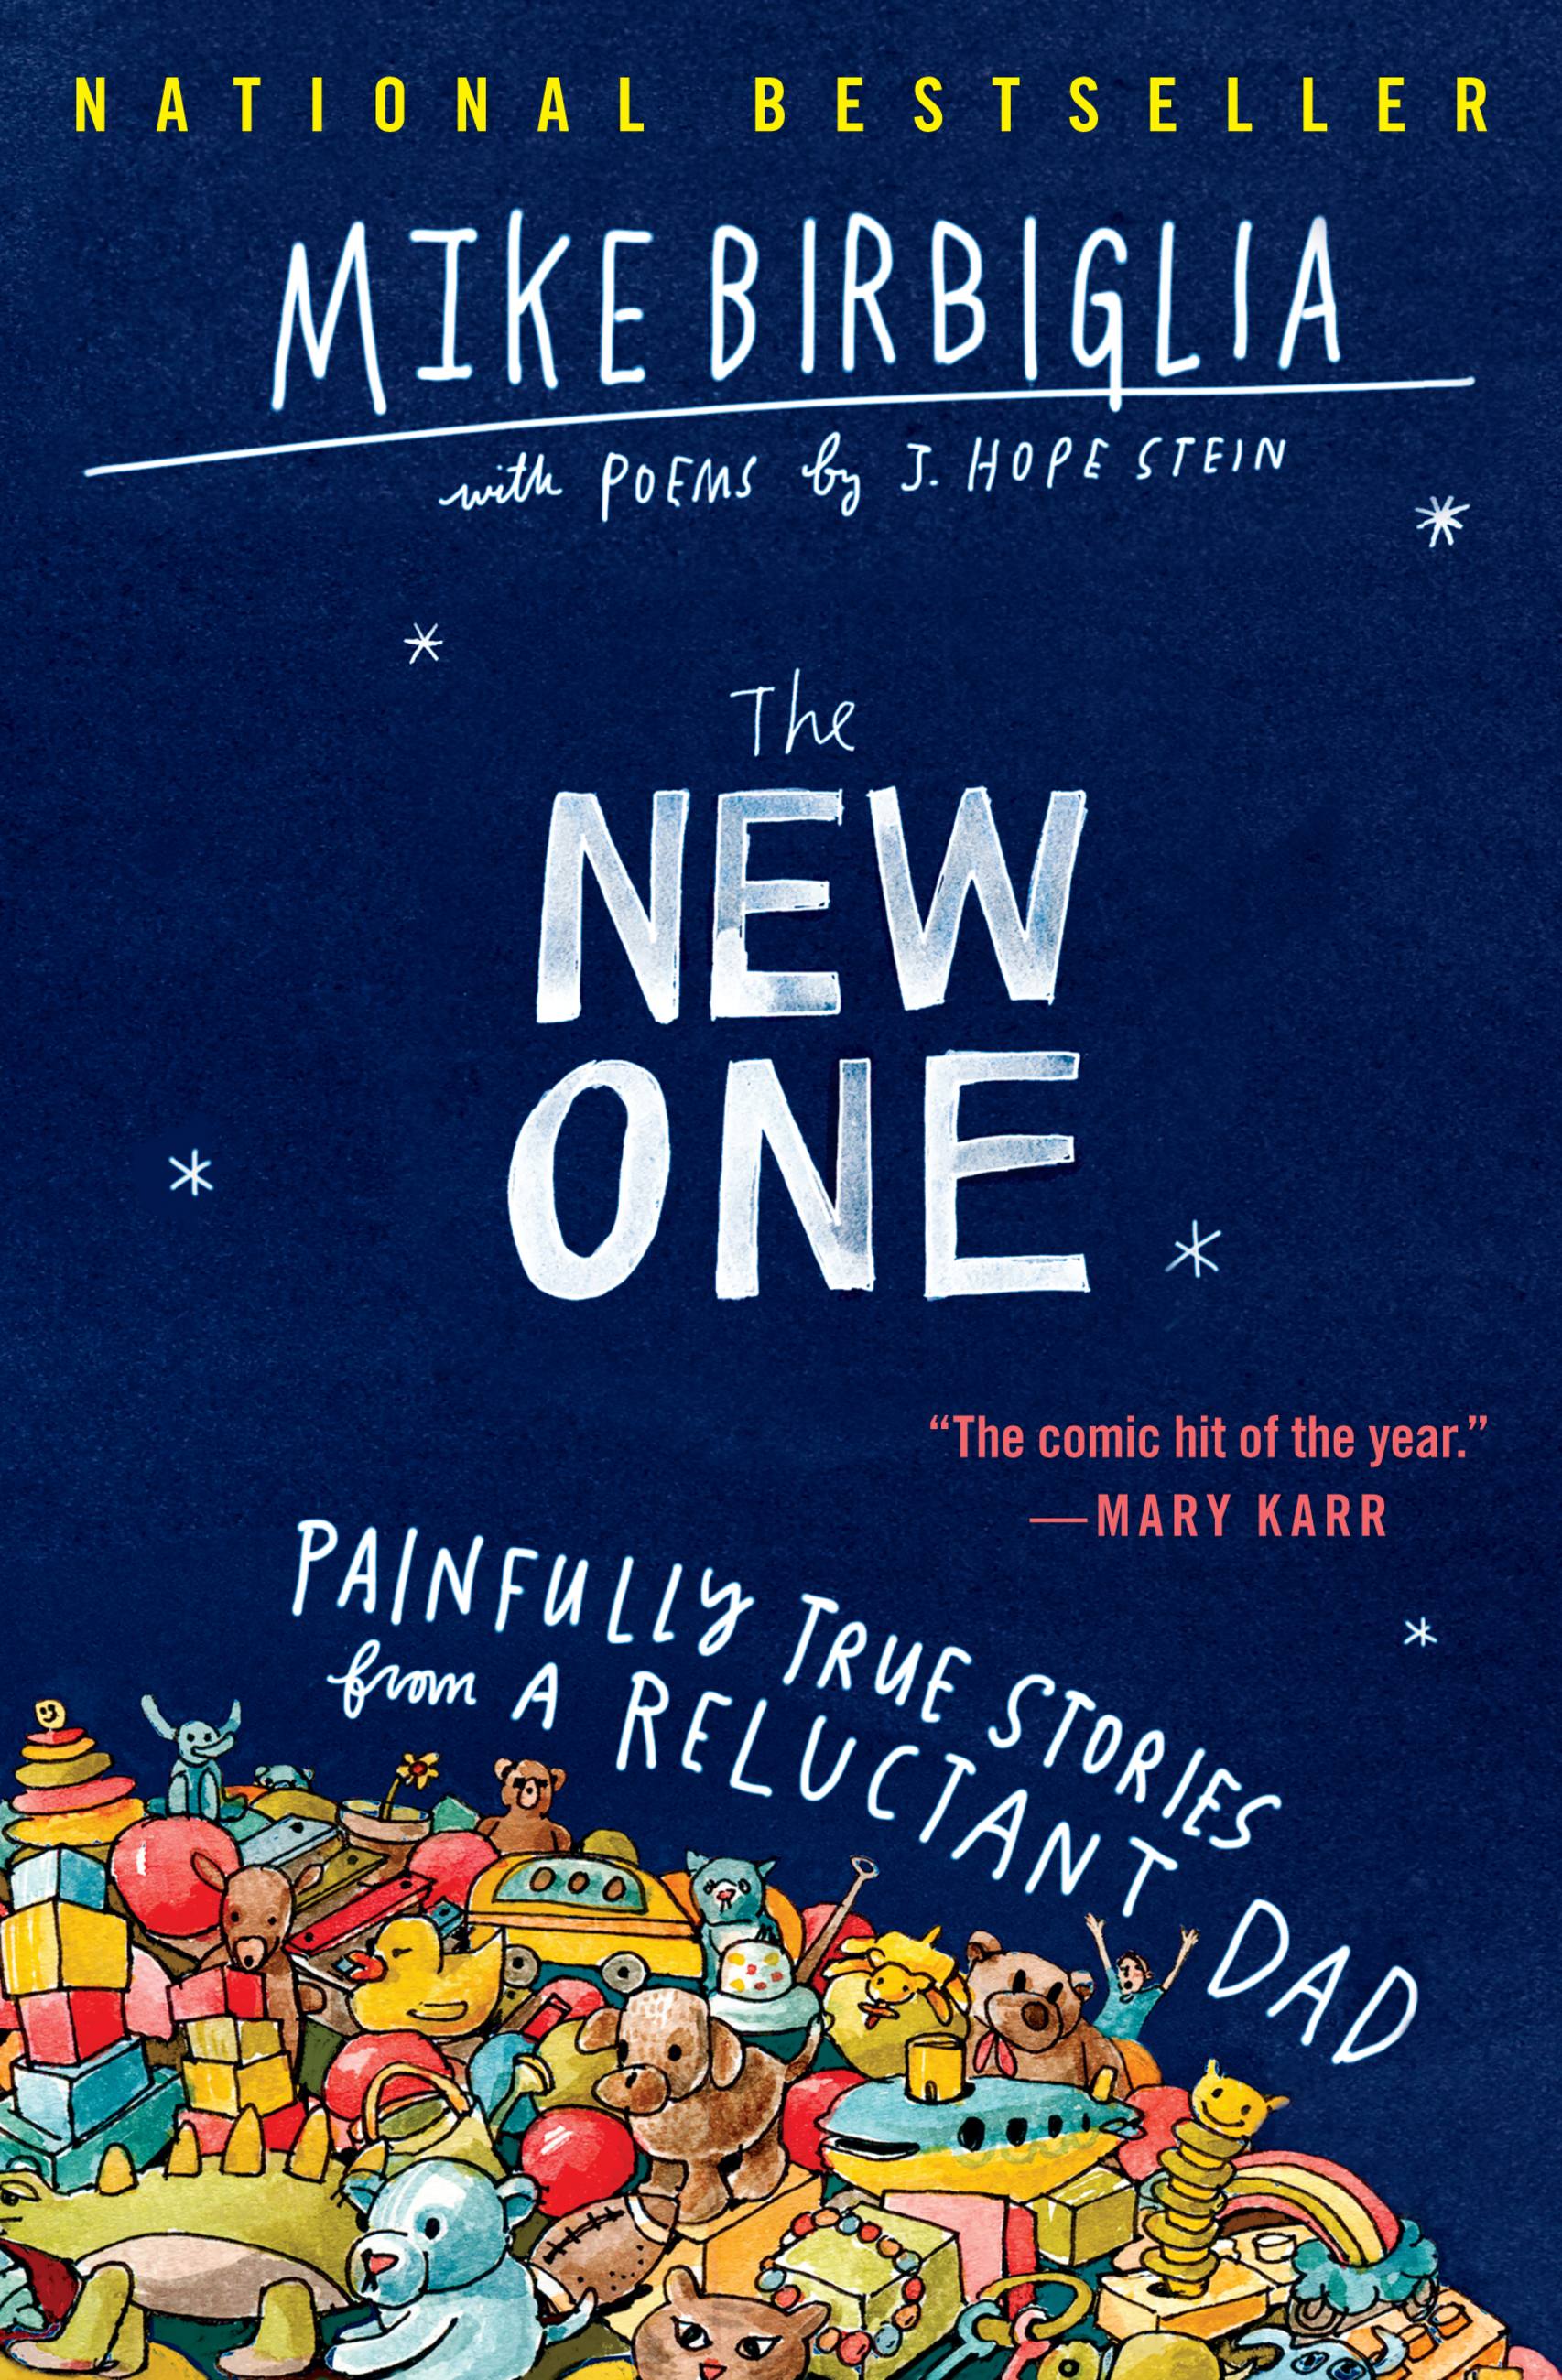 Fast Tame Sliping Roomeds X Videos - The New One by Mike Birbiglia | Hachette Book Group